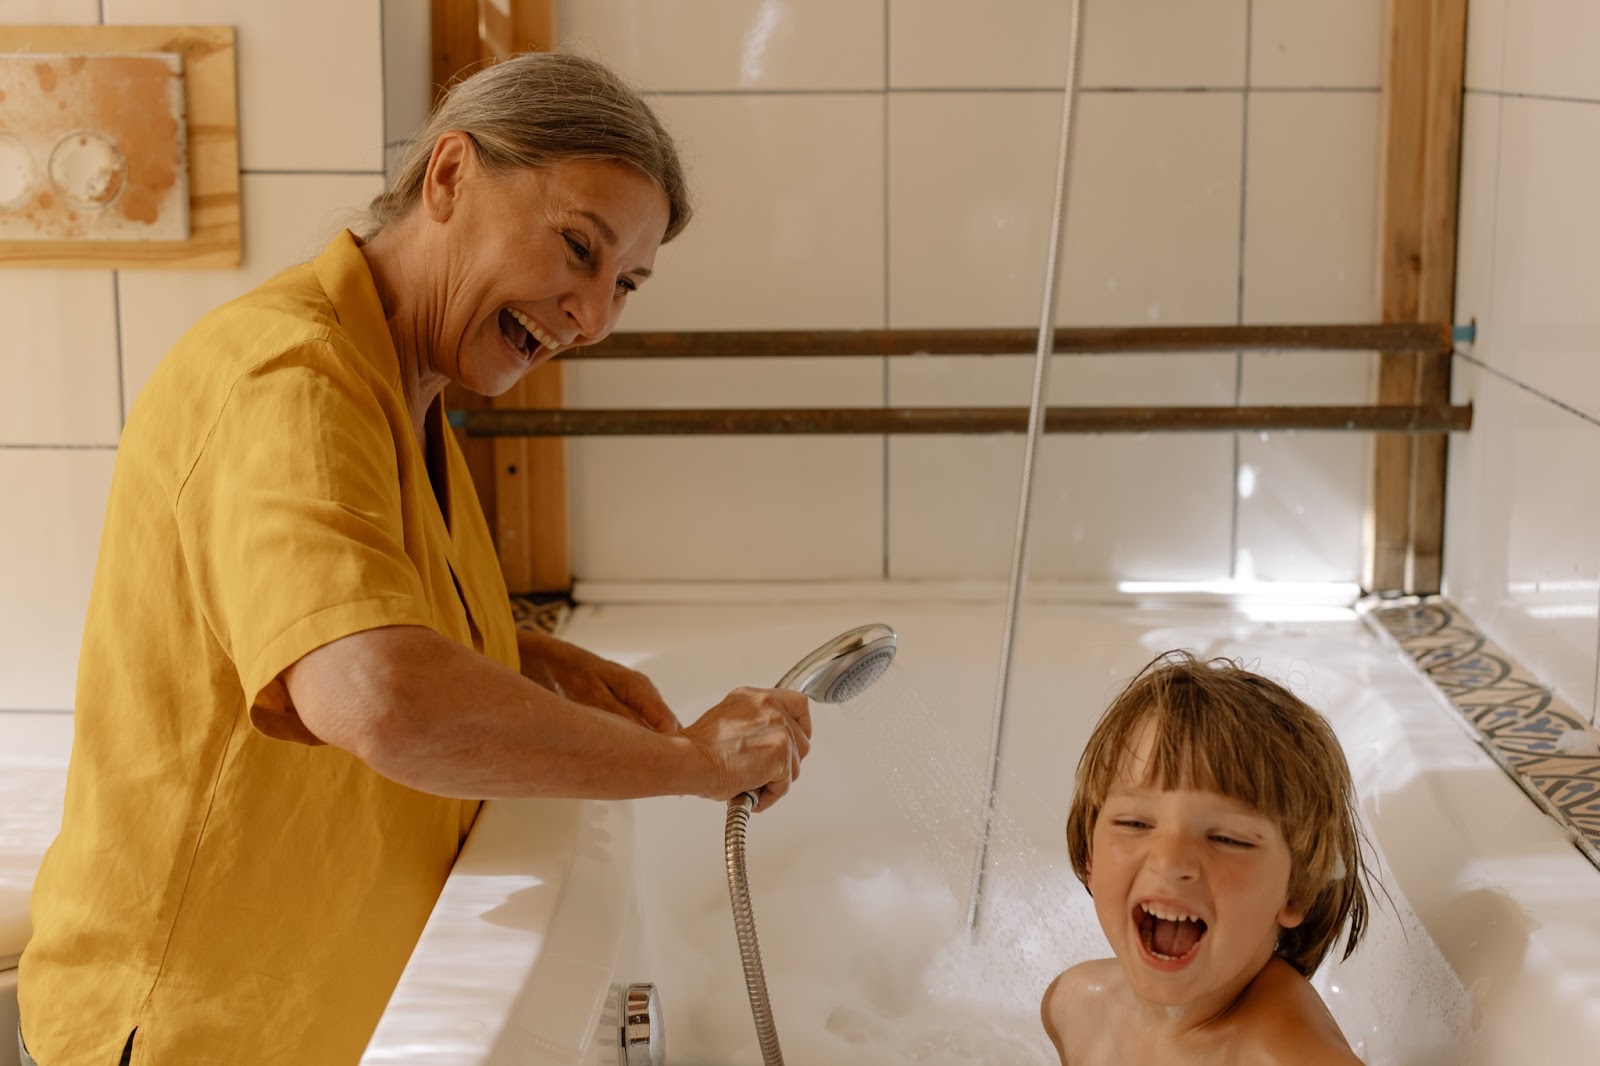 A grandmother sprays her grandchild with water in the bathtub. When traveling with small children, stick to routines like bath time.